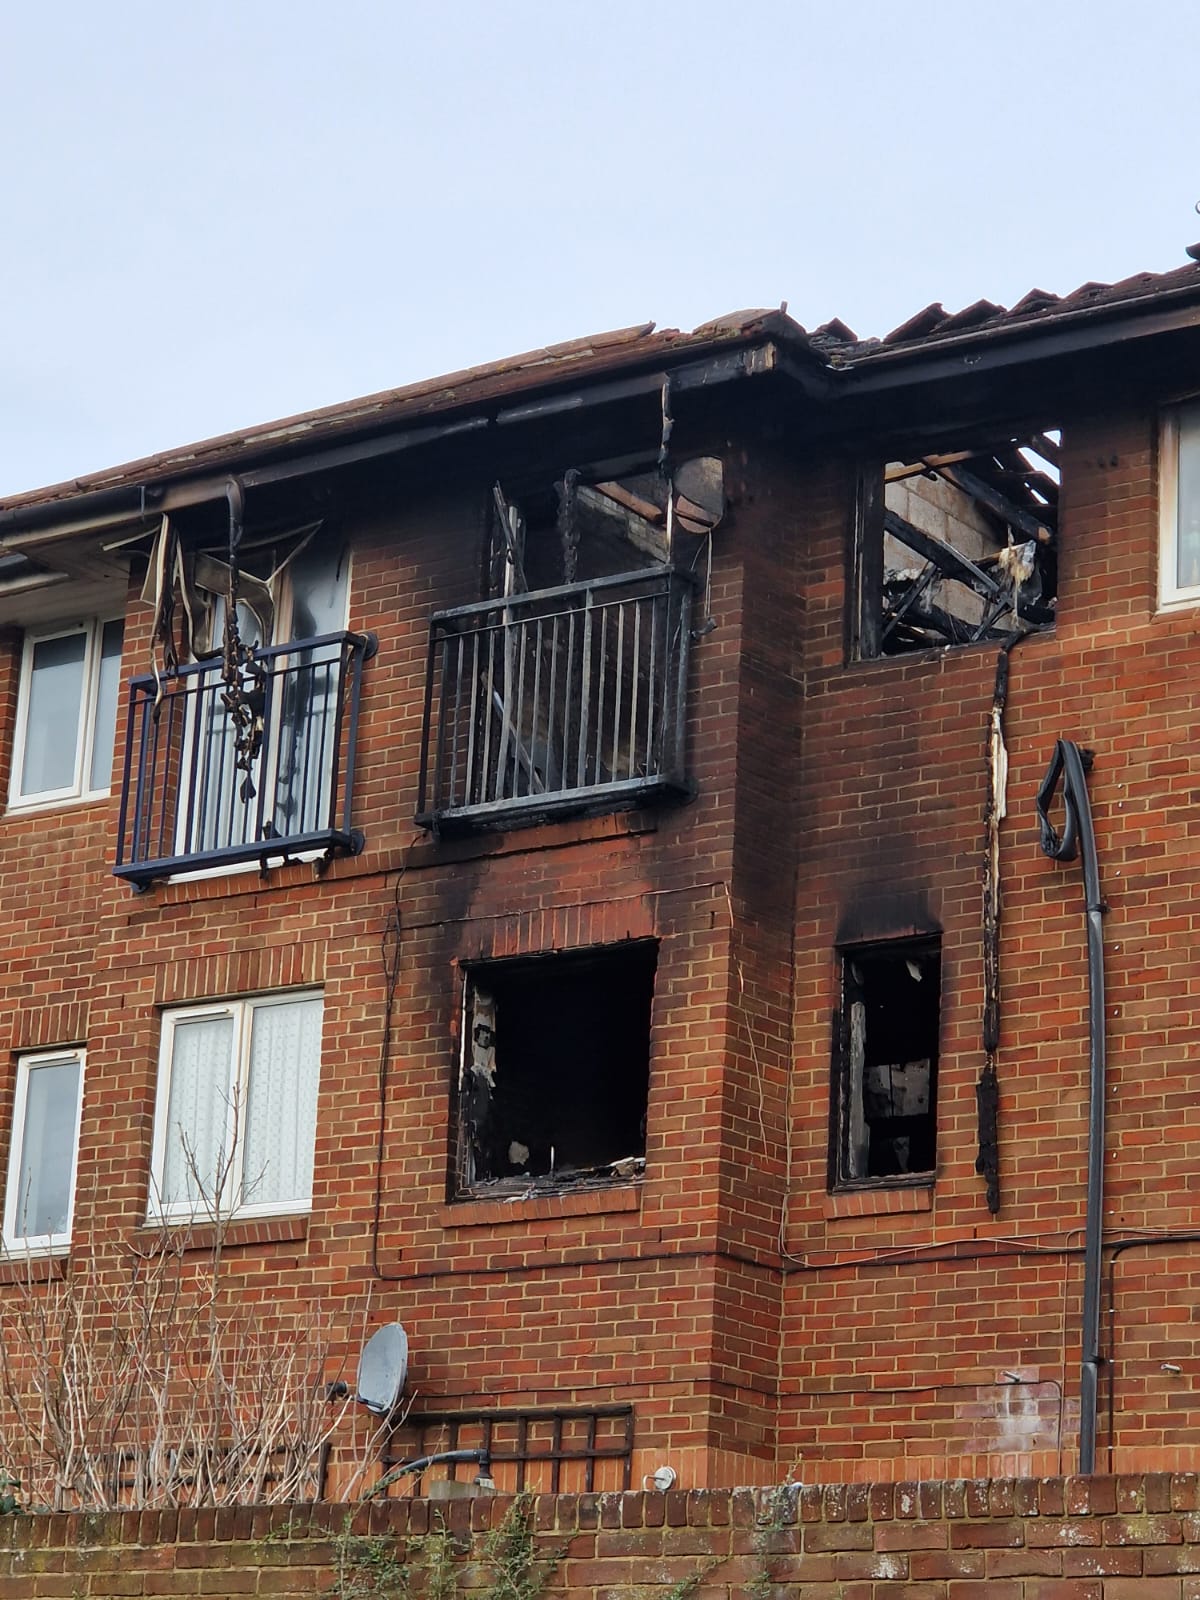 Probe launched into blaze at Brighton flats which has left 17 people